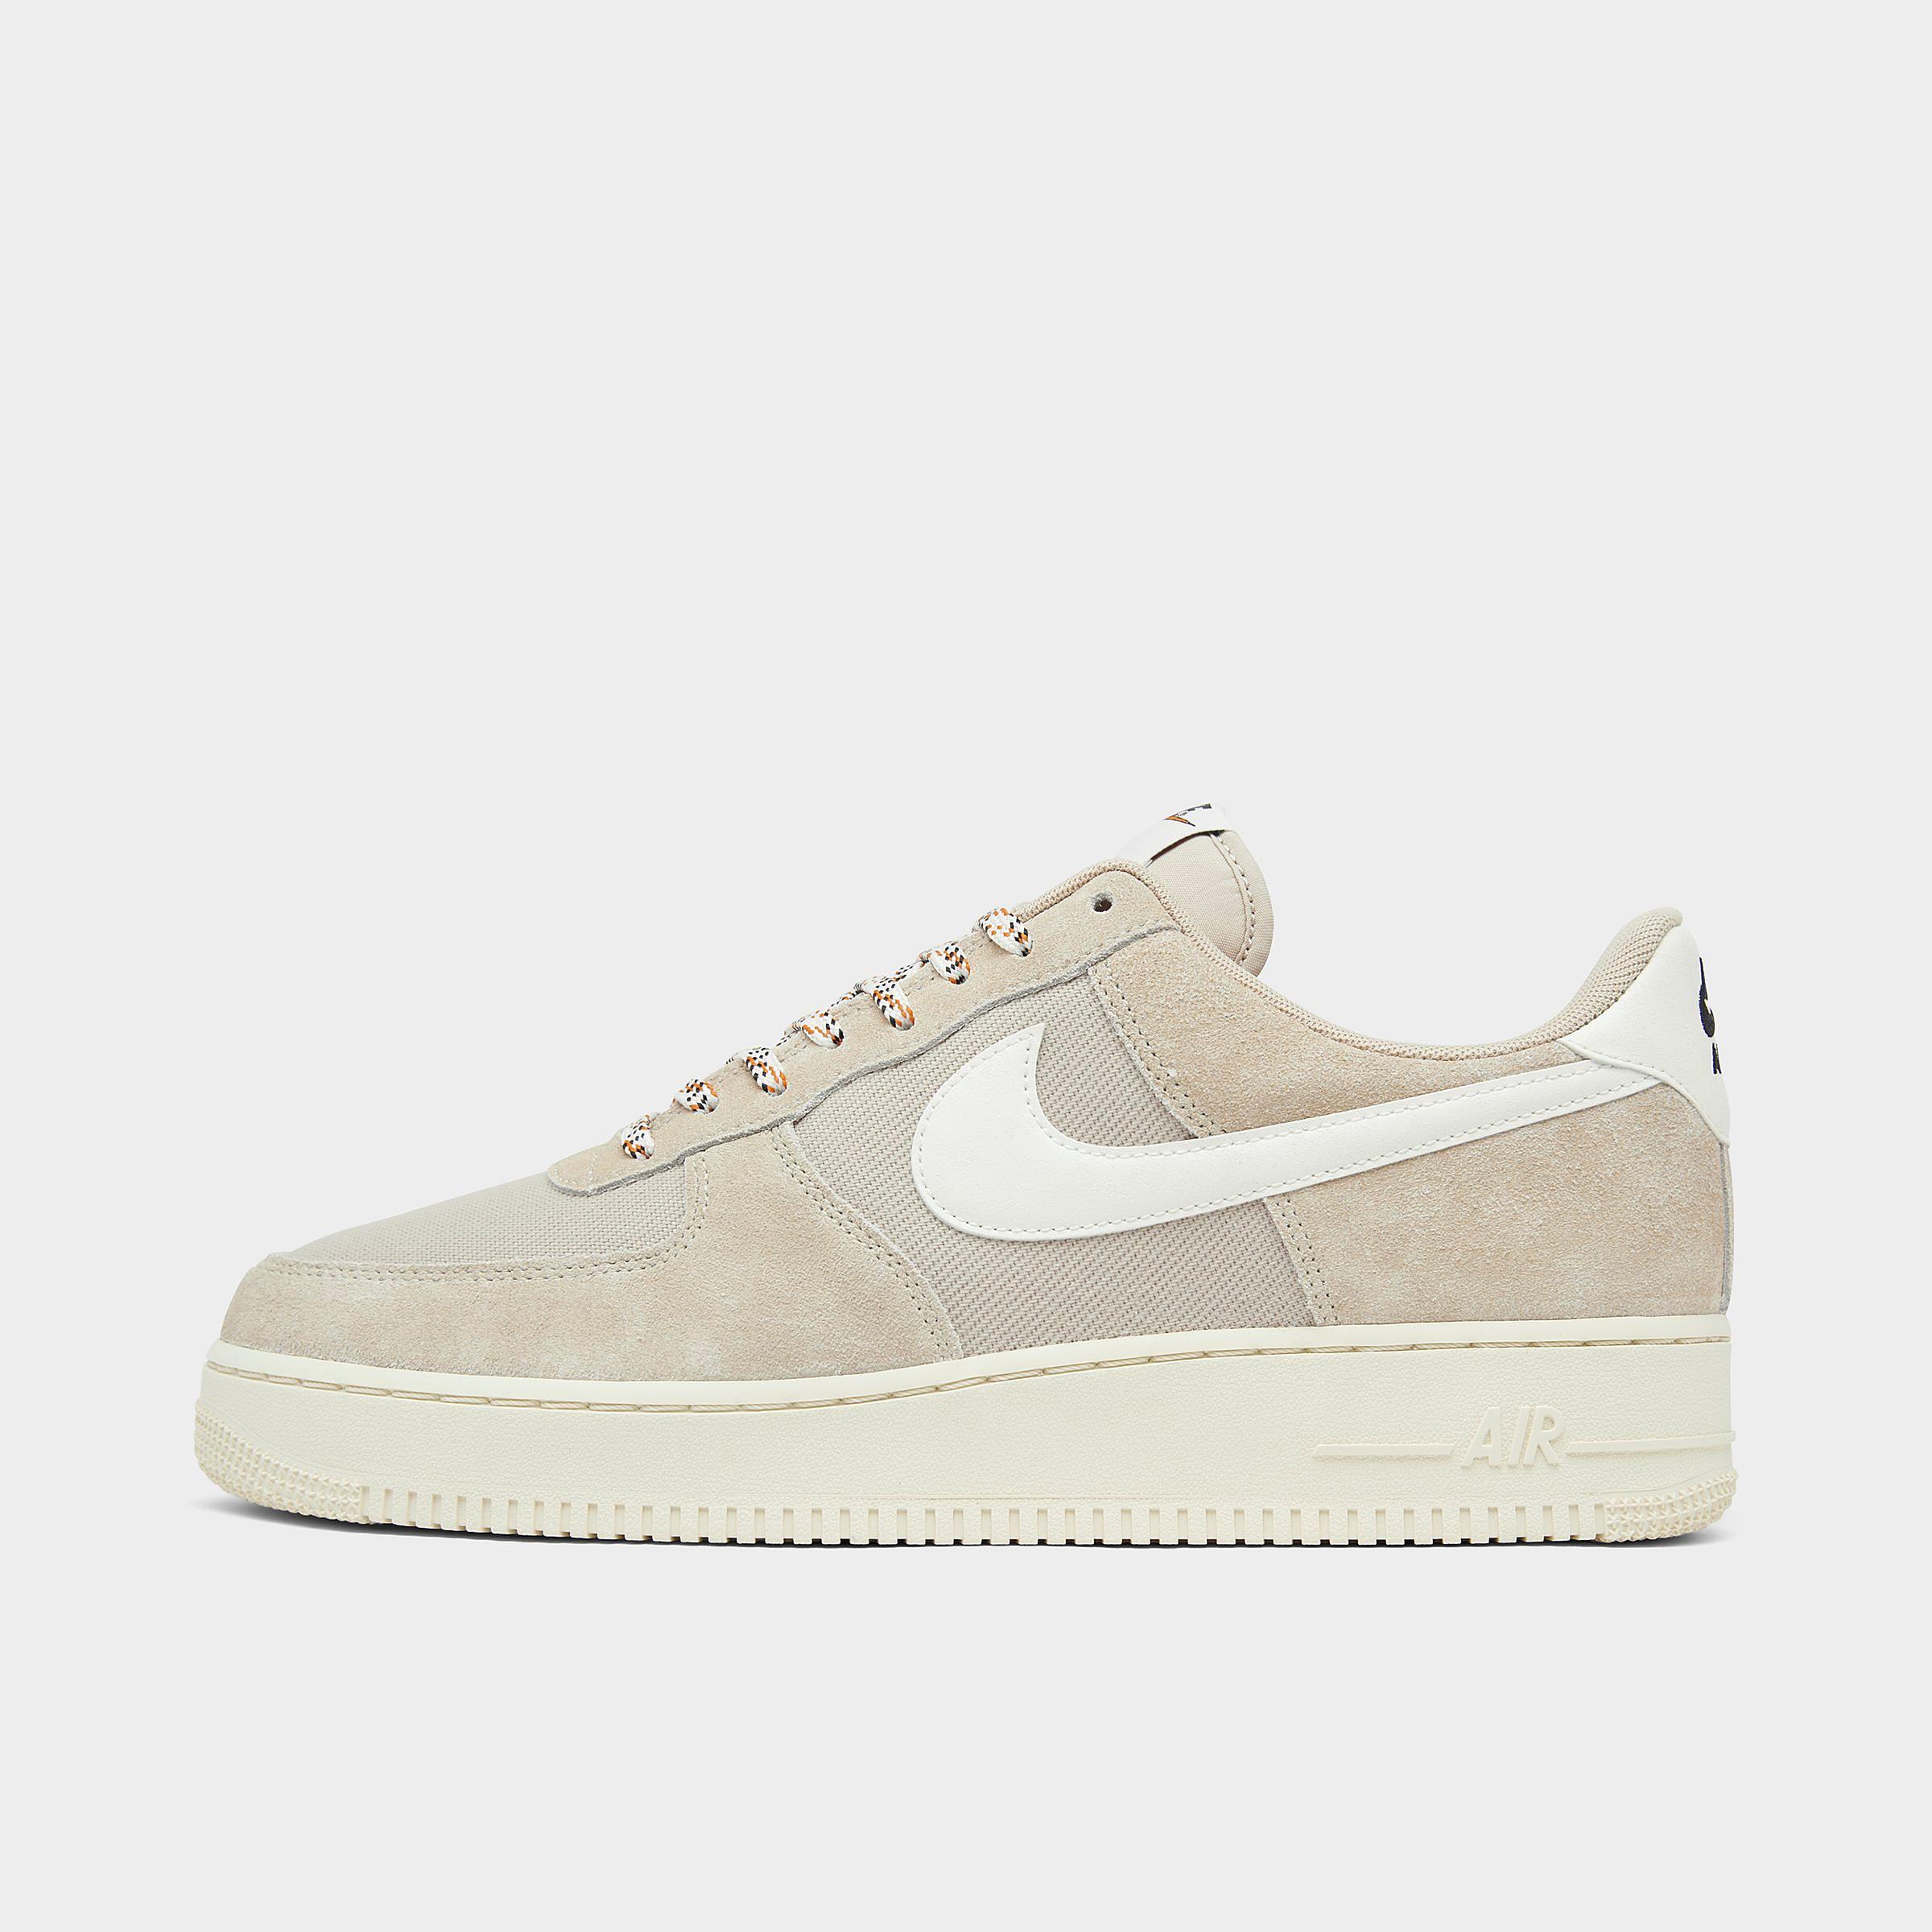 Mens Nike Air Force 1 07 LV8 Certified Fresh Casual Shoes